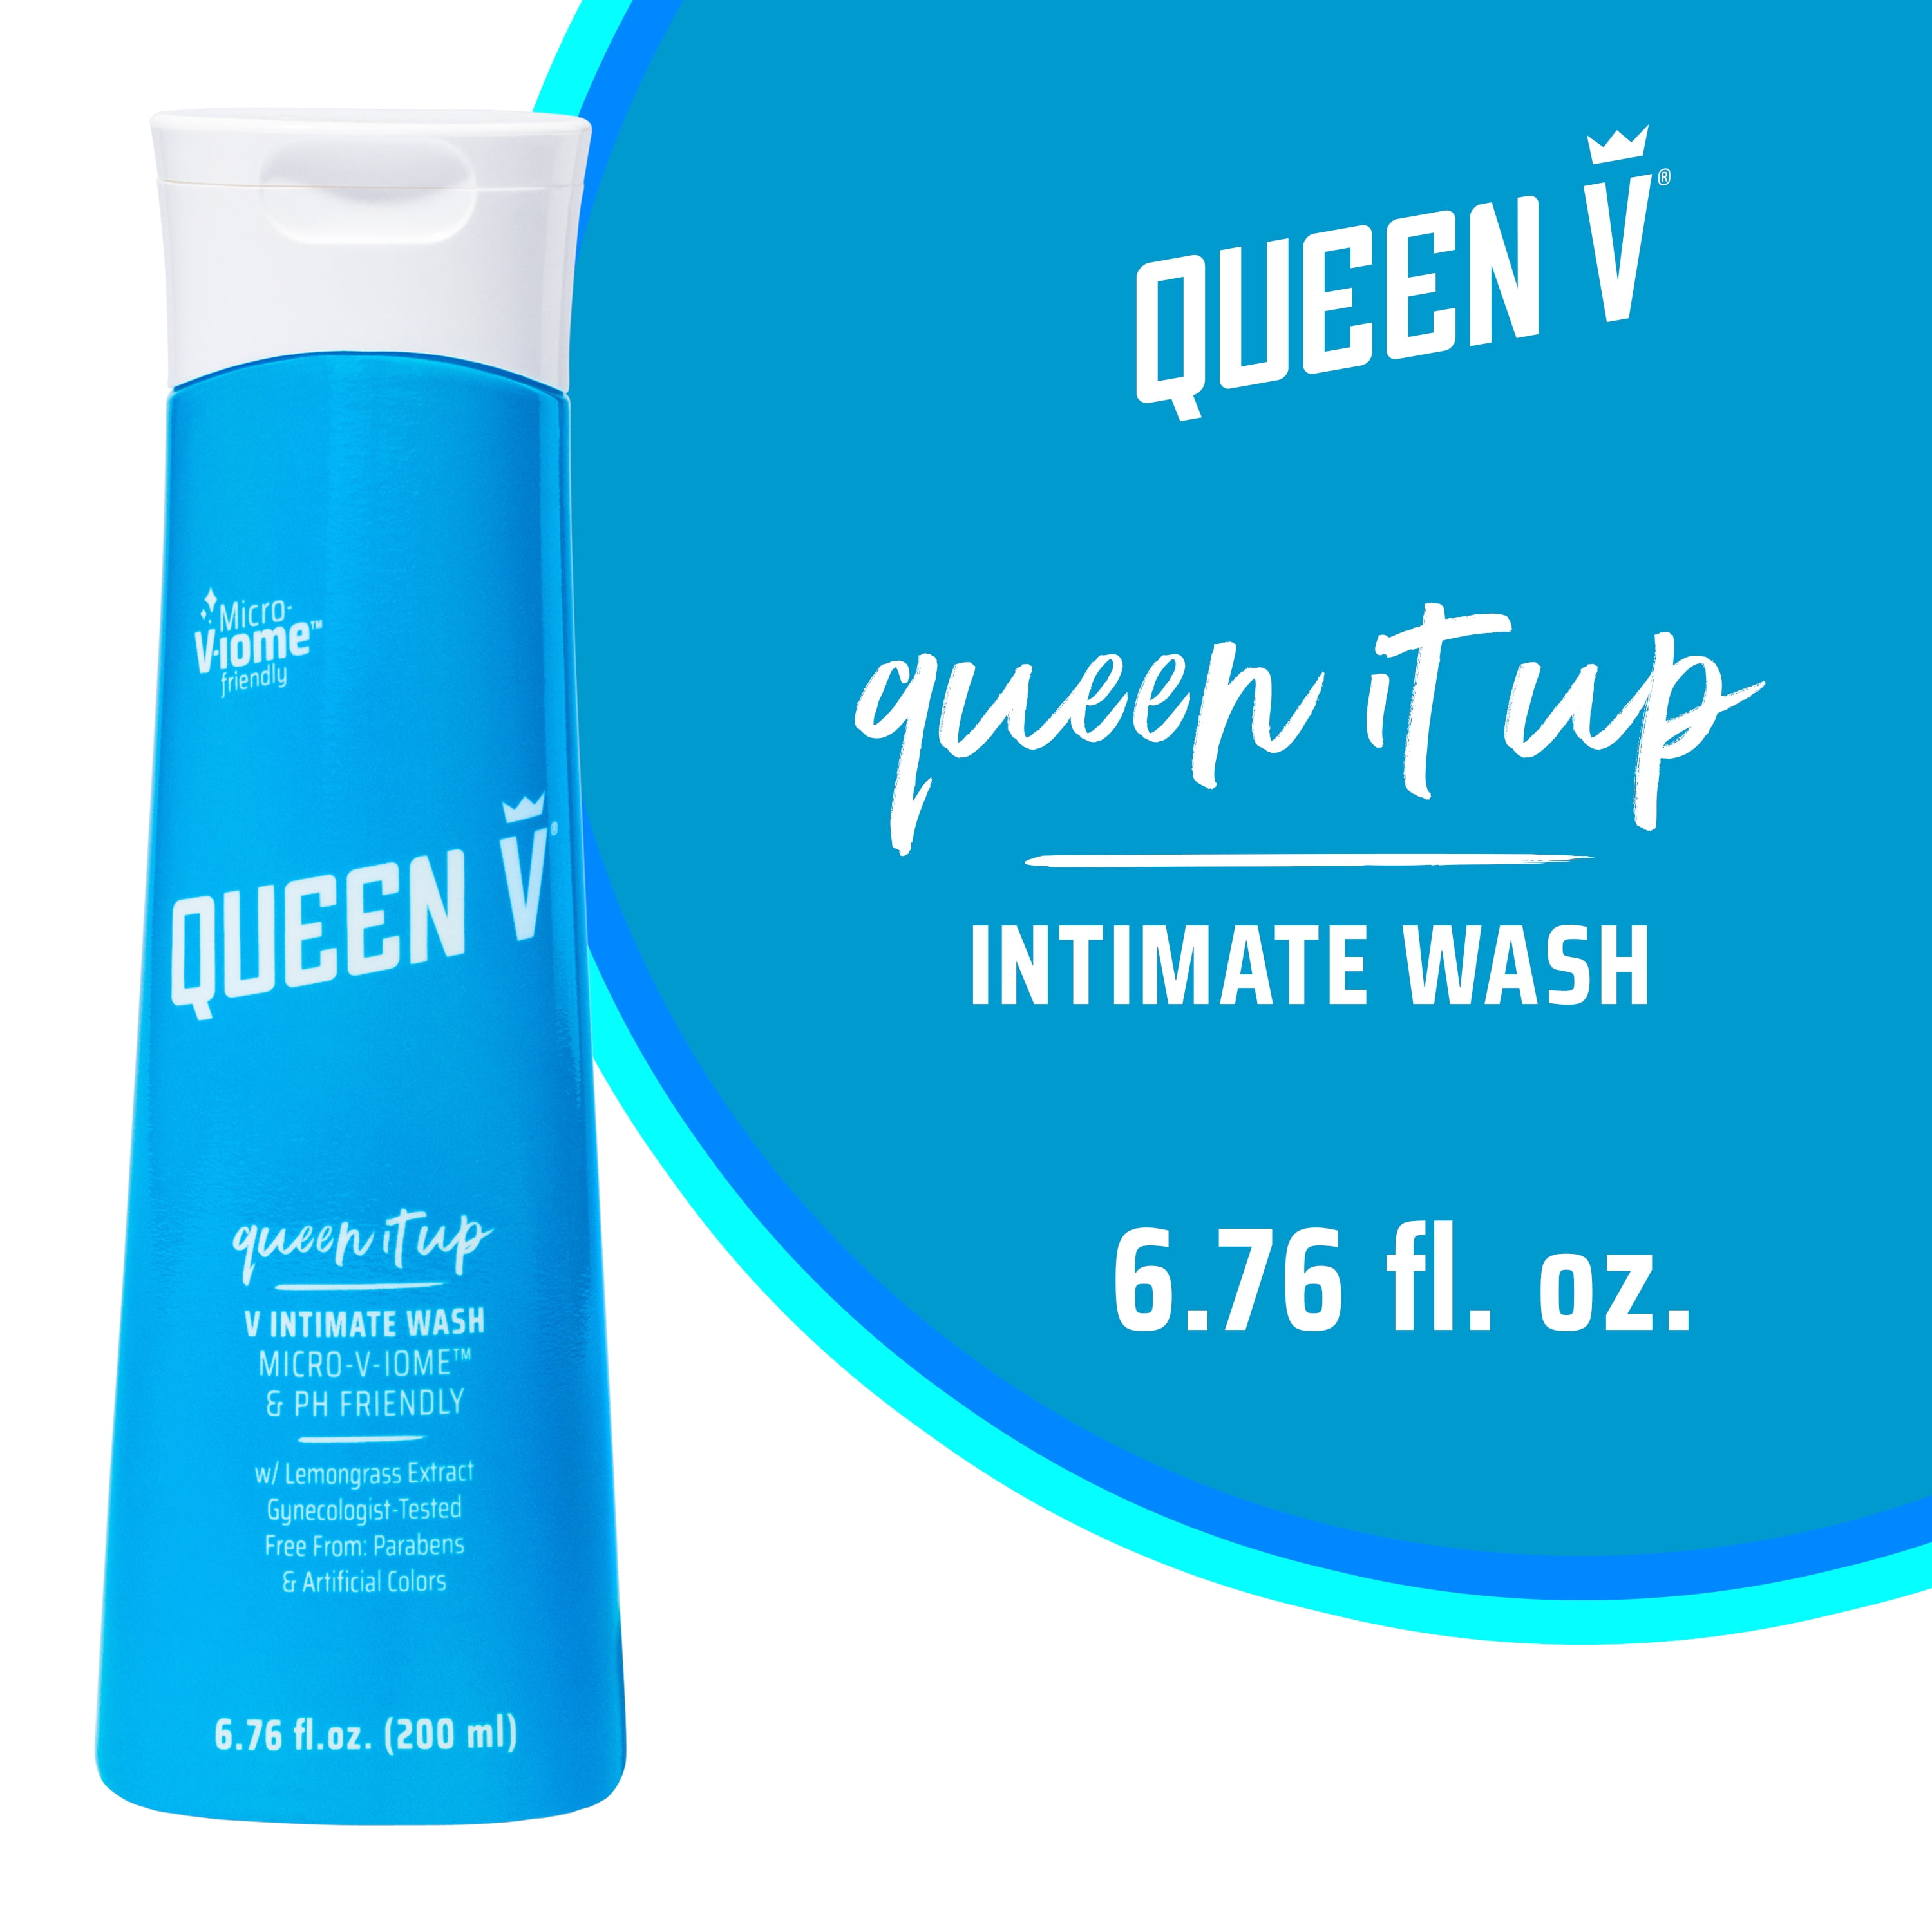 QUEEN V Queen it Up- Intimate Wash, pH friendly, daily use fresh and clean shower gel with lemongrass extract and lactic acid, gynecologically tested, recyclable bottle, 6.76 oz.